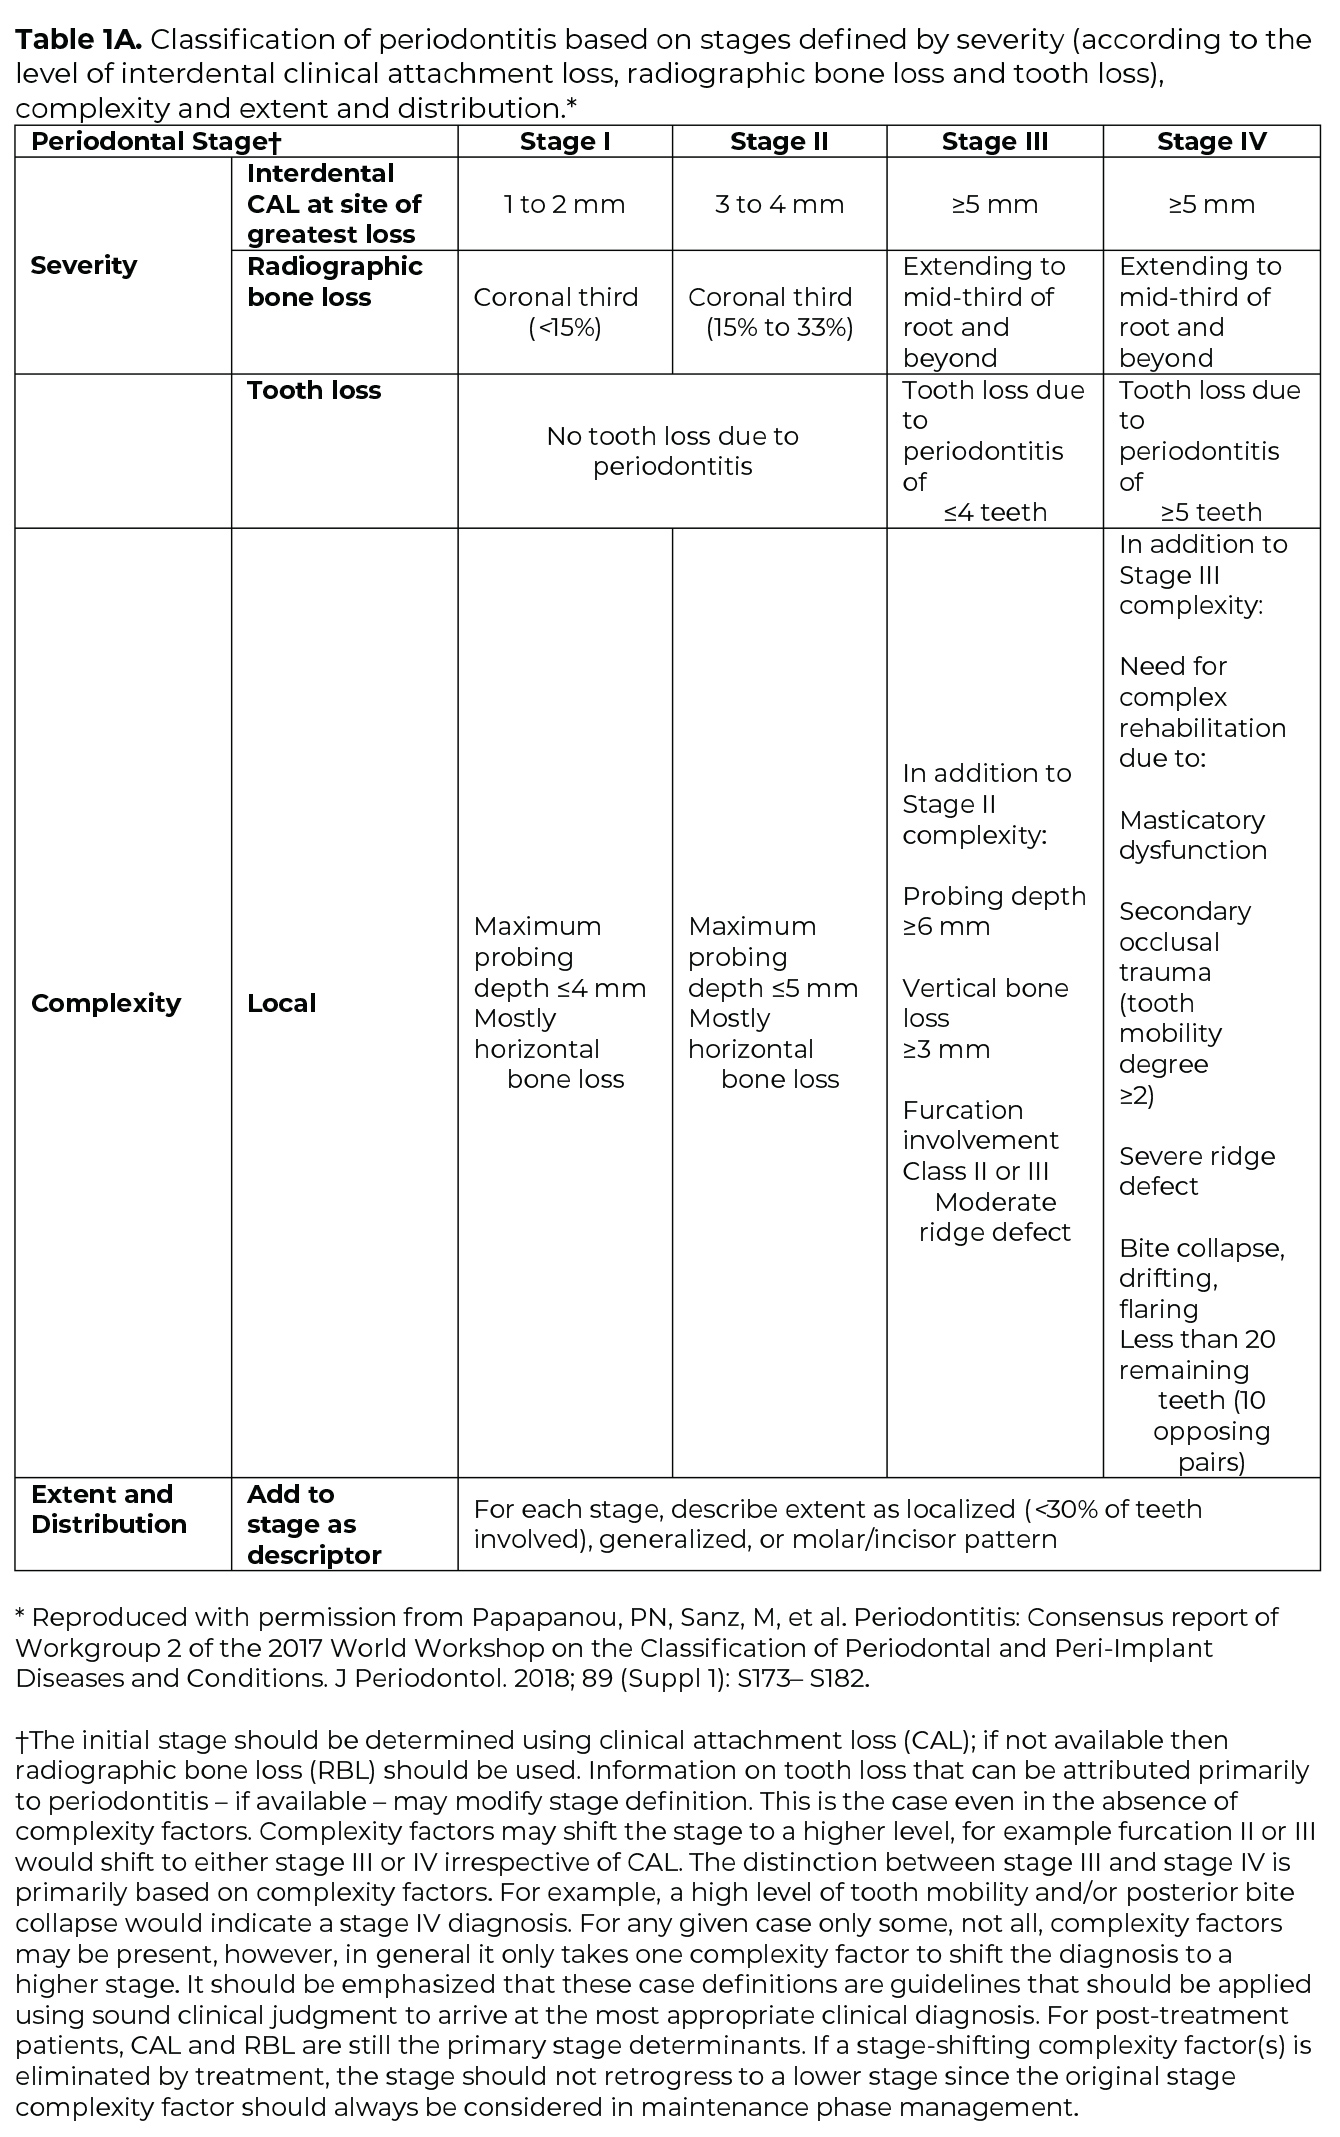 In image of Table 1A. Classification of periodontitis based on stages defined by severity, complexity, and extent and distribution.